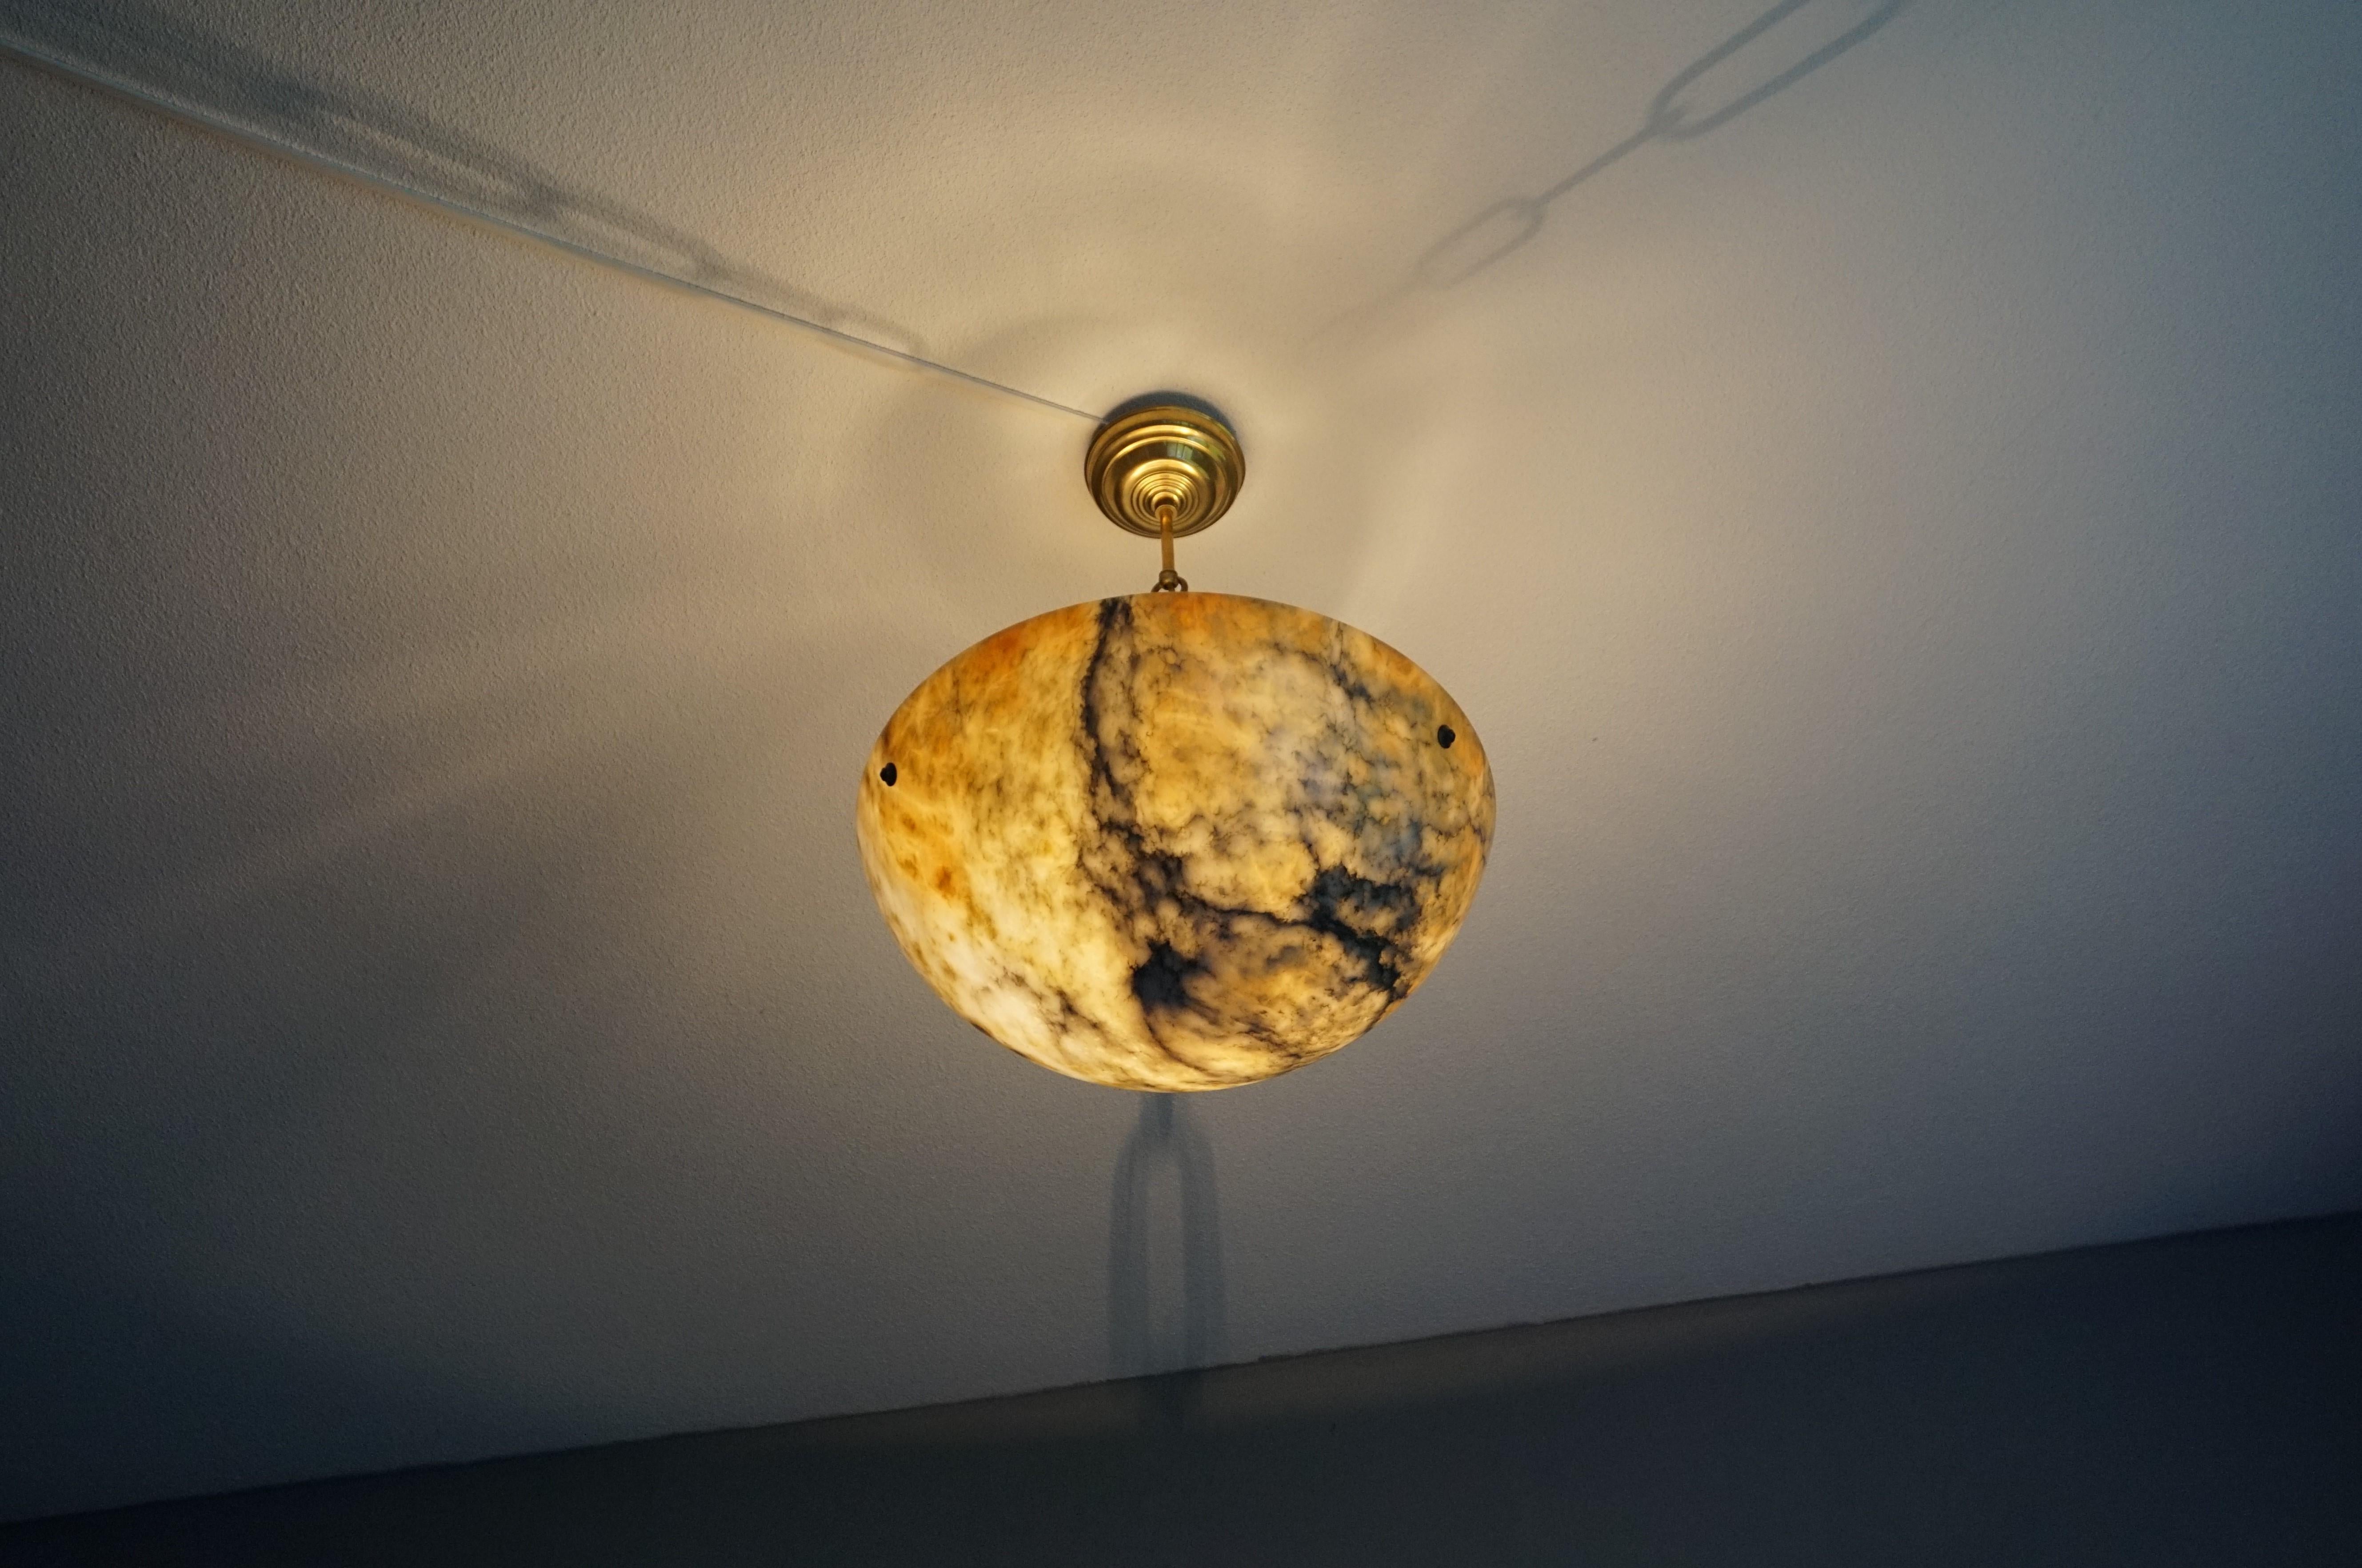 Impressive size, antique alabaster chandelier with amber colored patches.

One of the qualities of alabaster pendants is that no two shades will ever be exactly the same. Mother nature created this mineral stone over the course of many centuries and